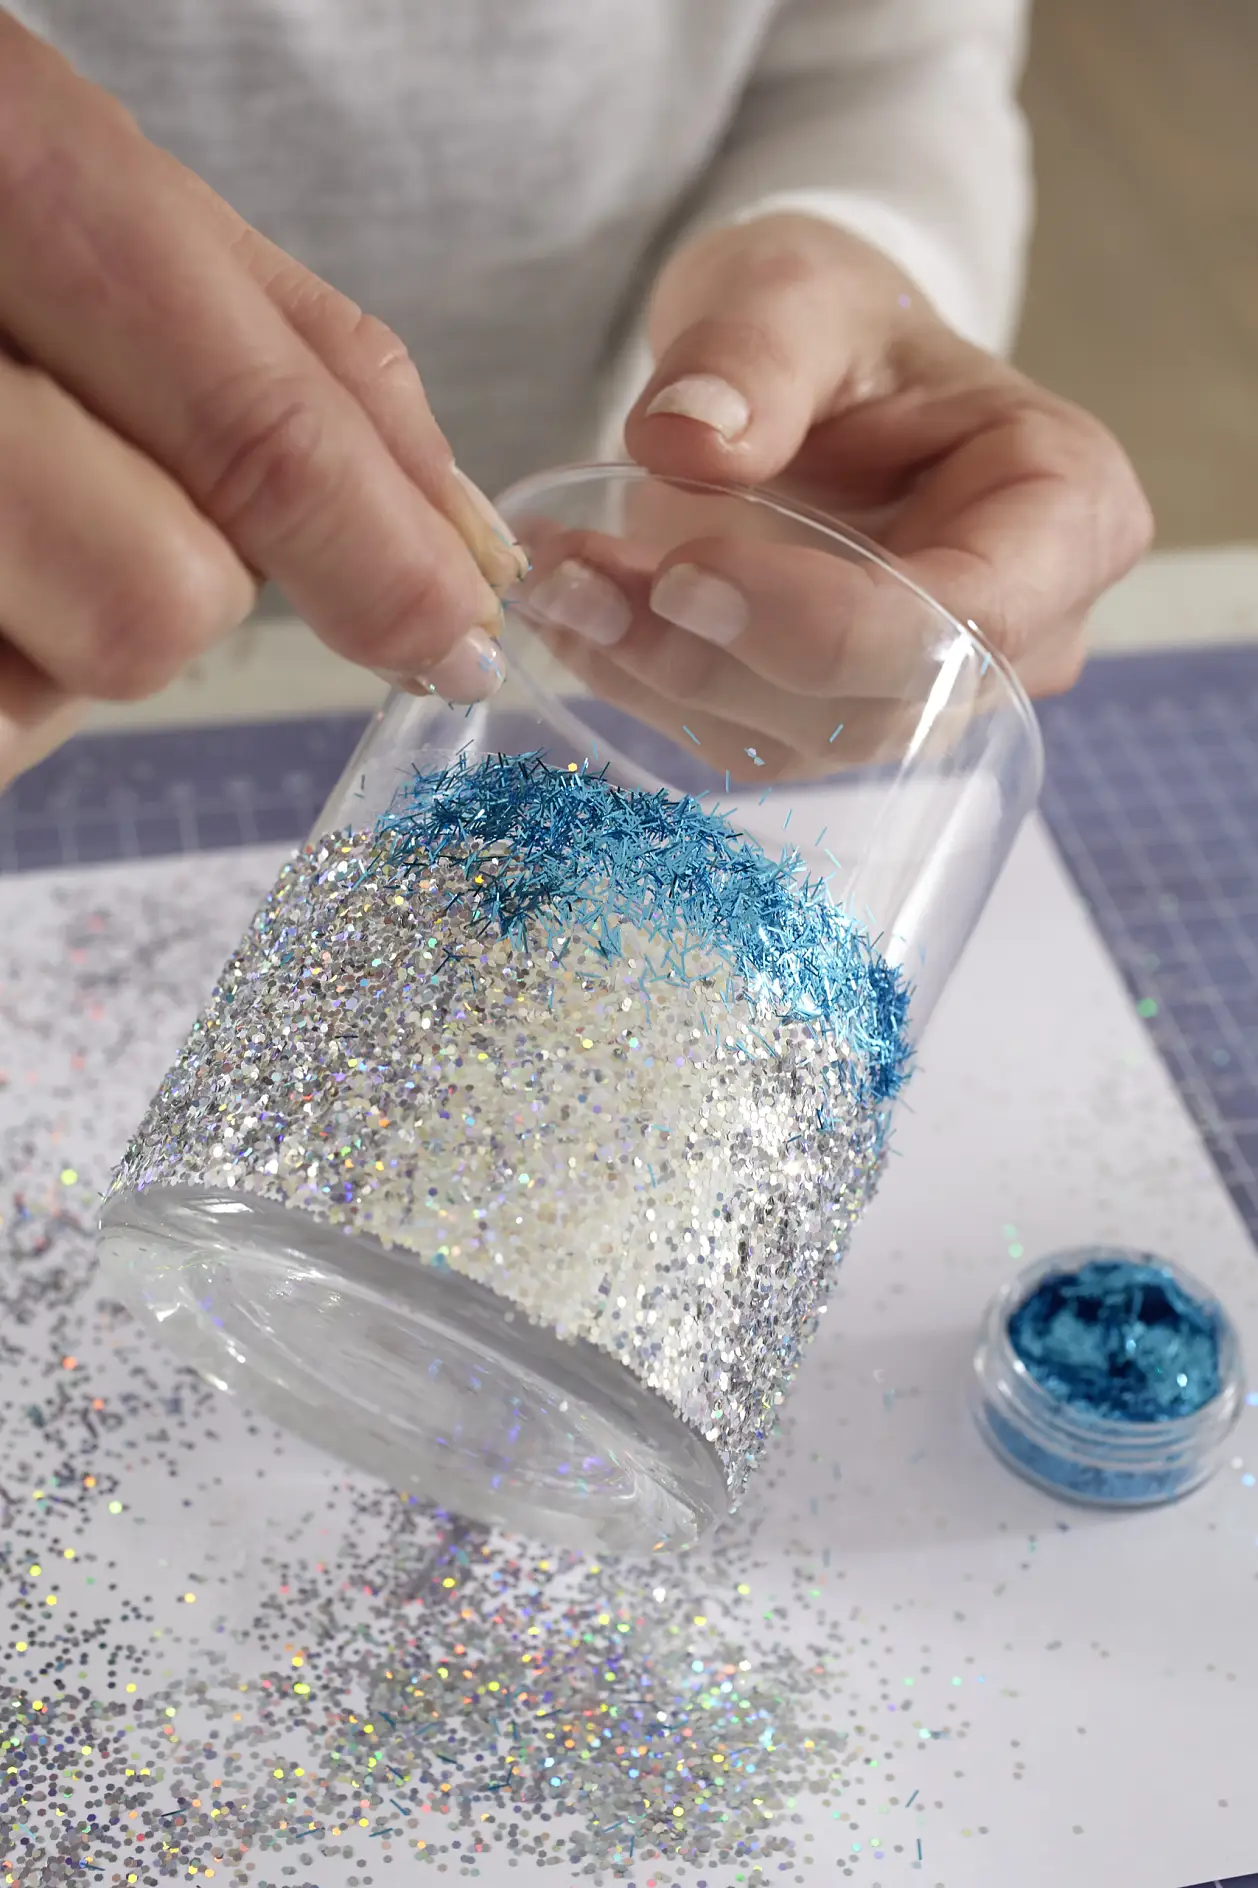 Sprinkle with turquoise glitter powder.